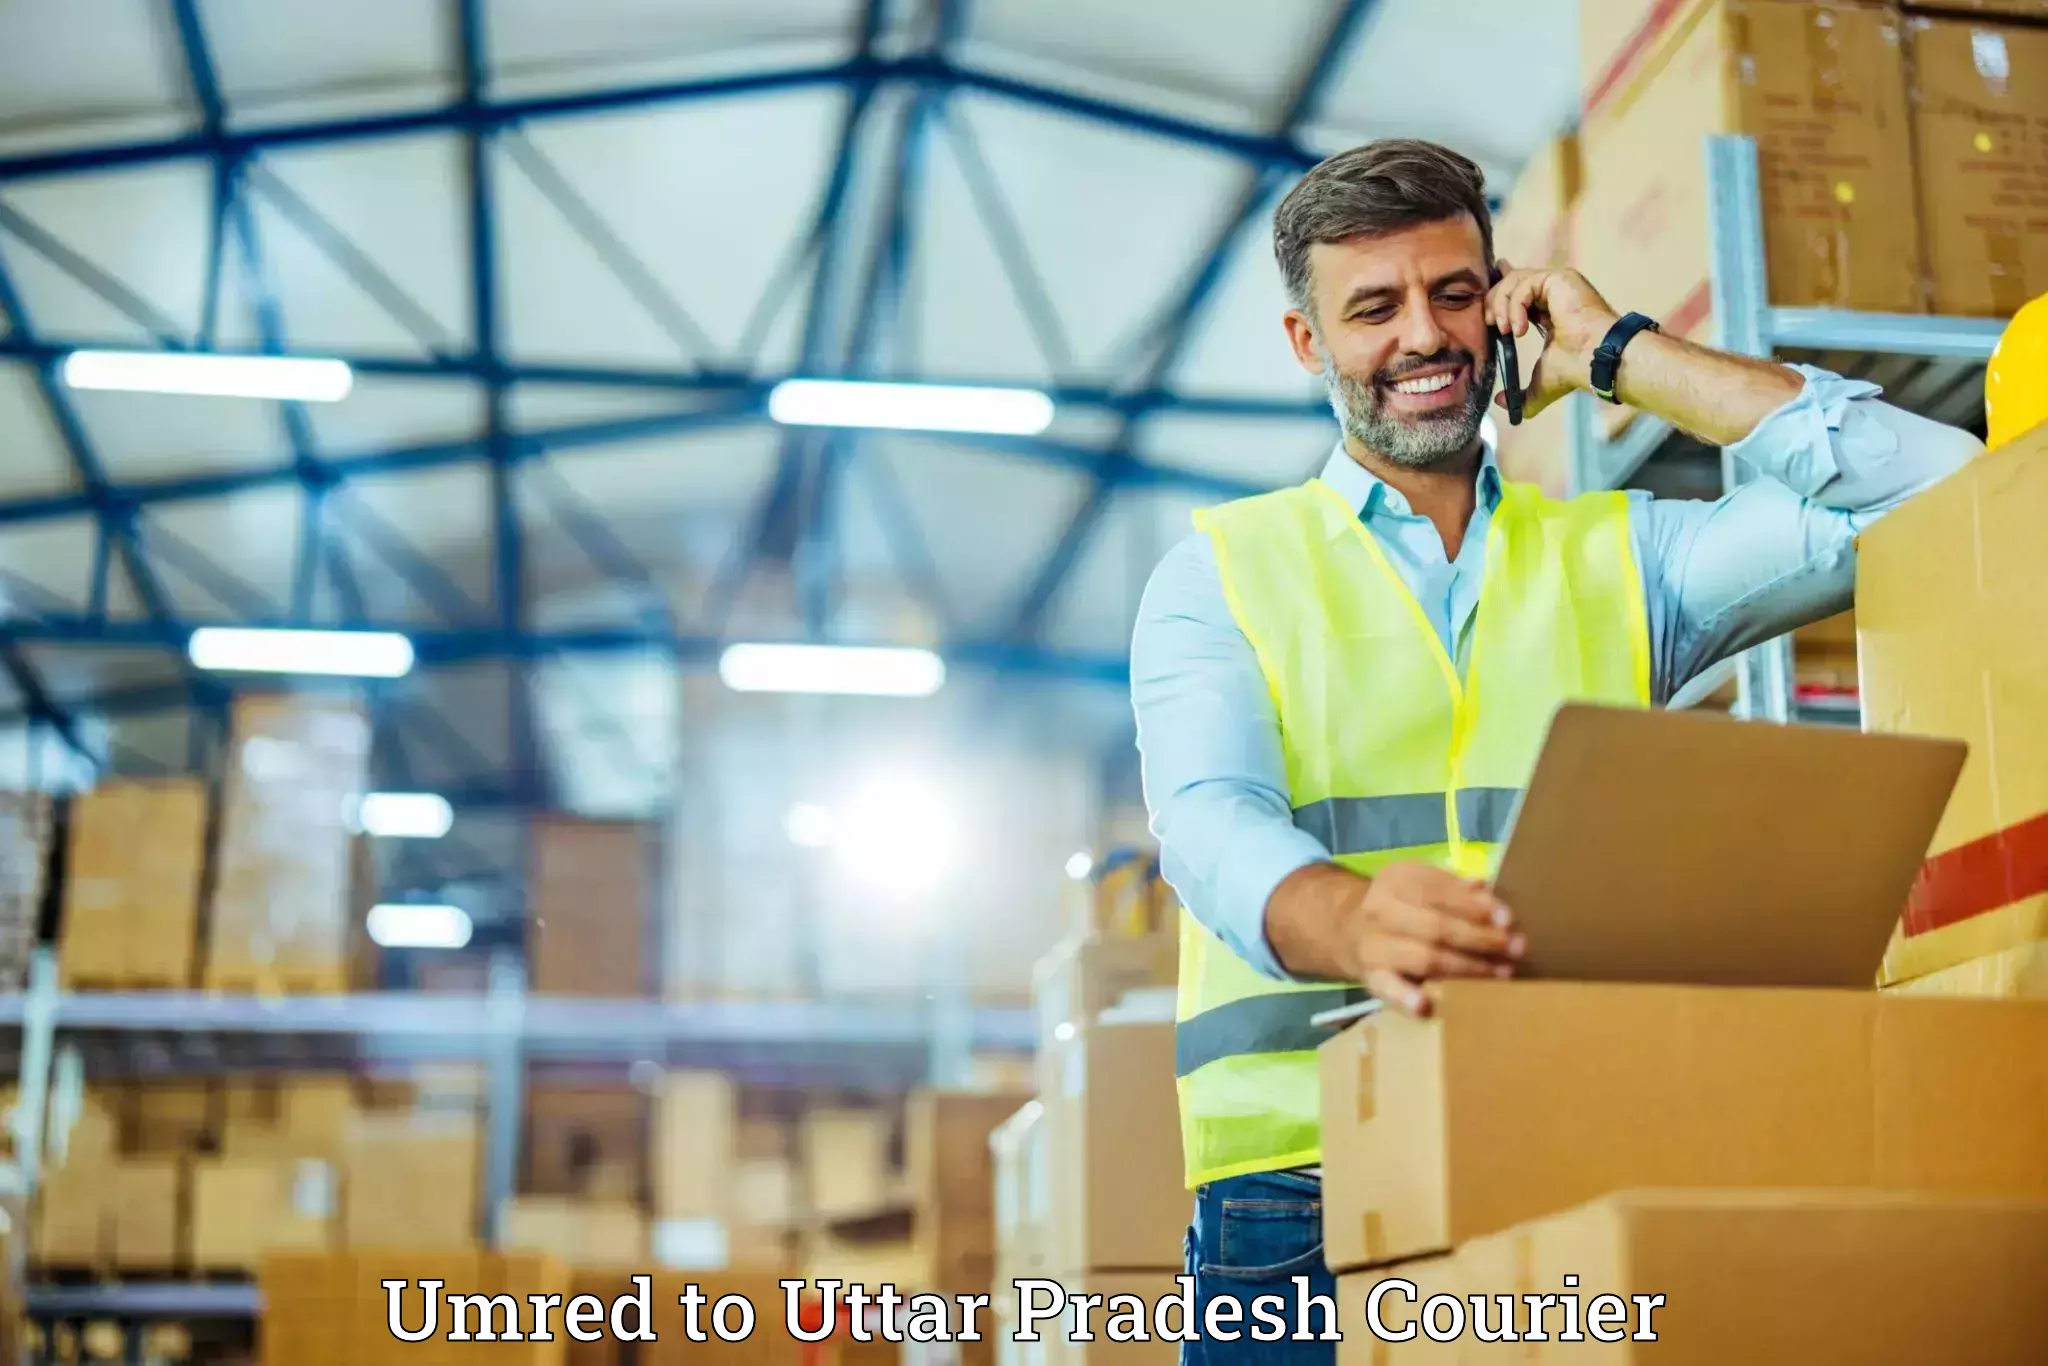 Luggage shipment specialists Umred to Vrindavan